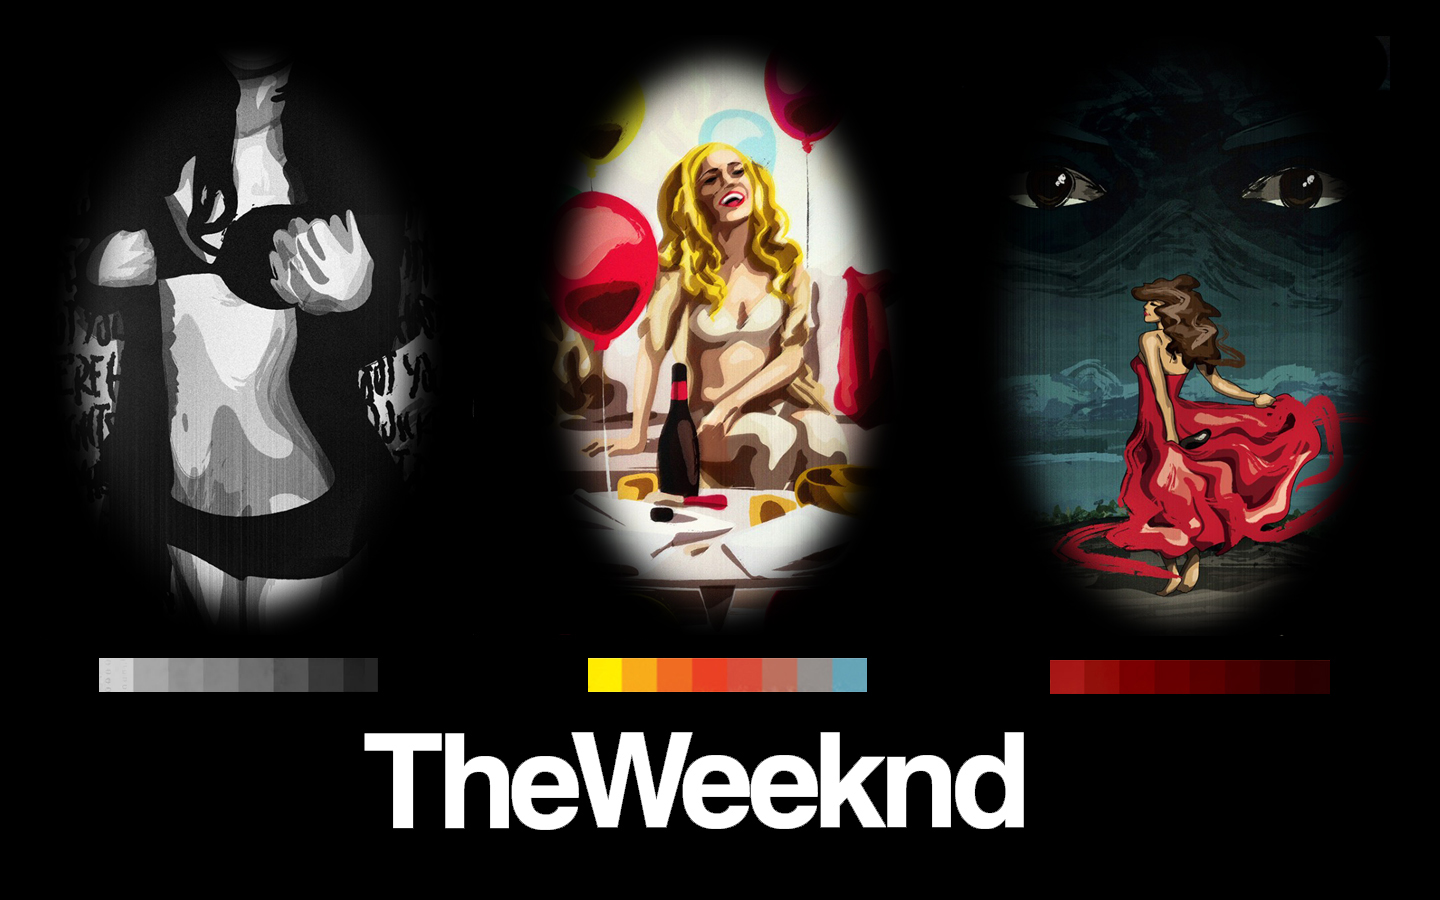 The Weeknd Art Thread Covers GIFs and more   Page 6 Kanye West